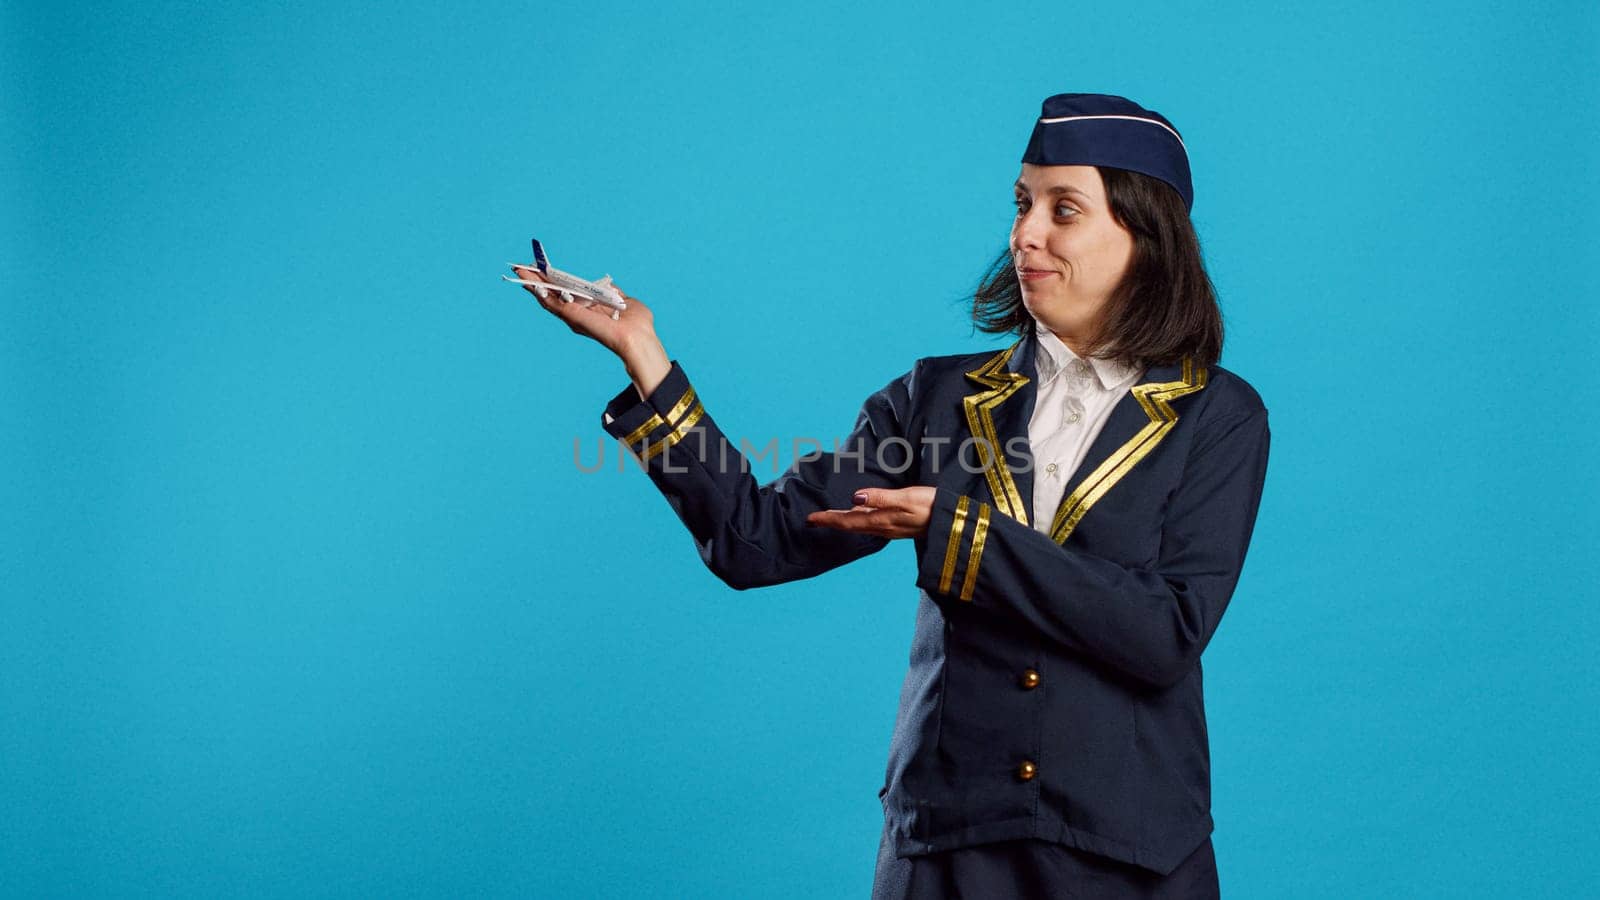 Smiling stewardess showing artificial plane toy, feeling confident about aviation profession. Young person working as air hostess in uniform showing fake miniature plane in studio.